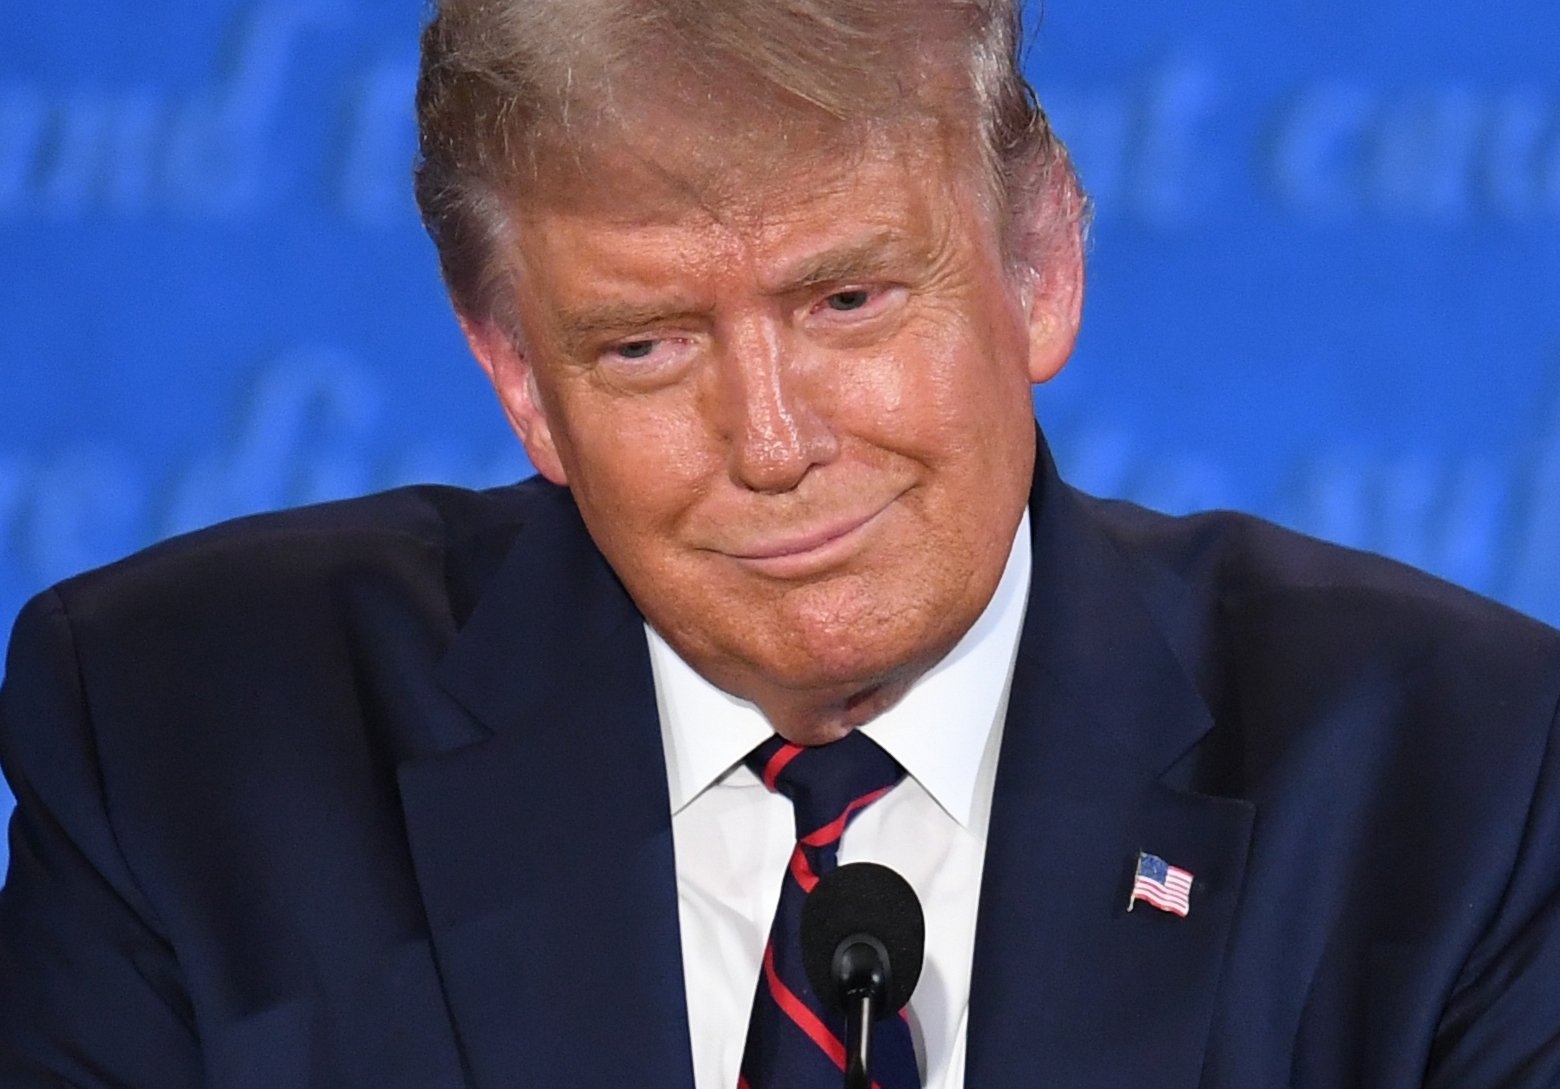 U.S. President Donald Trump smiles during the first presidential debate at Case Western Reserve University and Cleveland Clinic in Cleveland, Ohio, Sept. 29, 2020. (AFP)